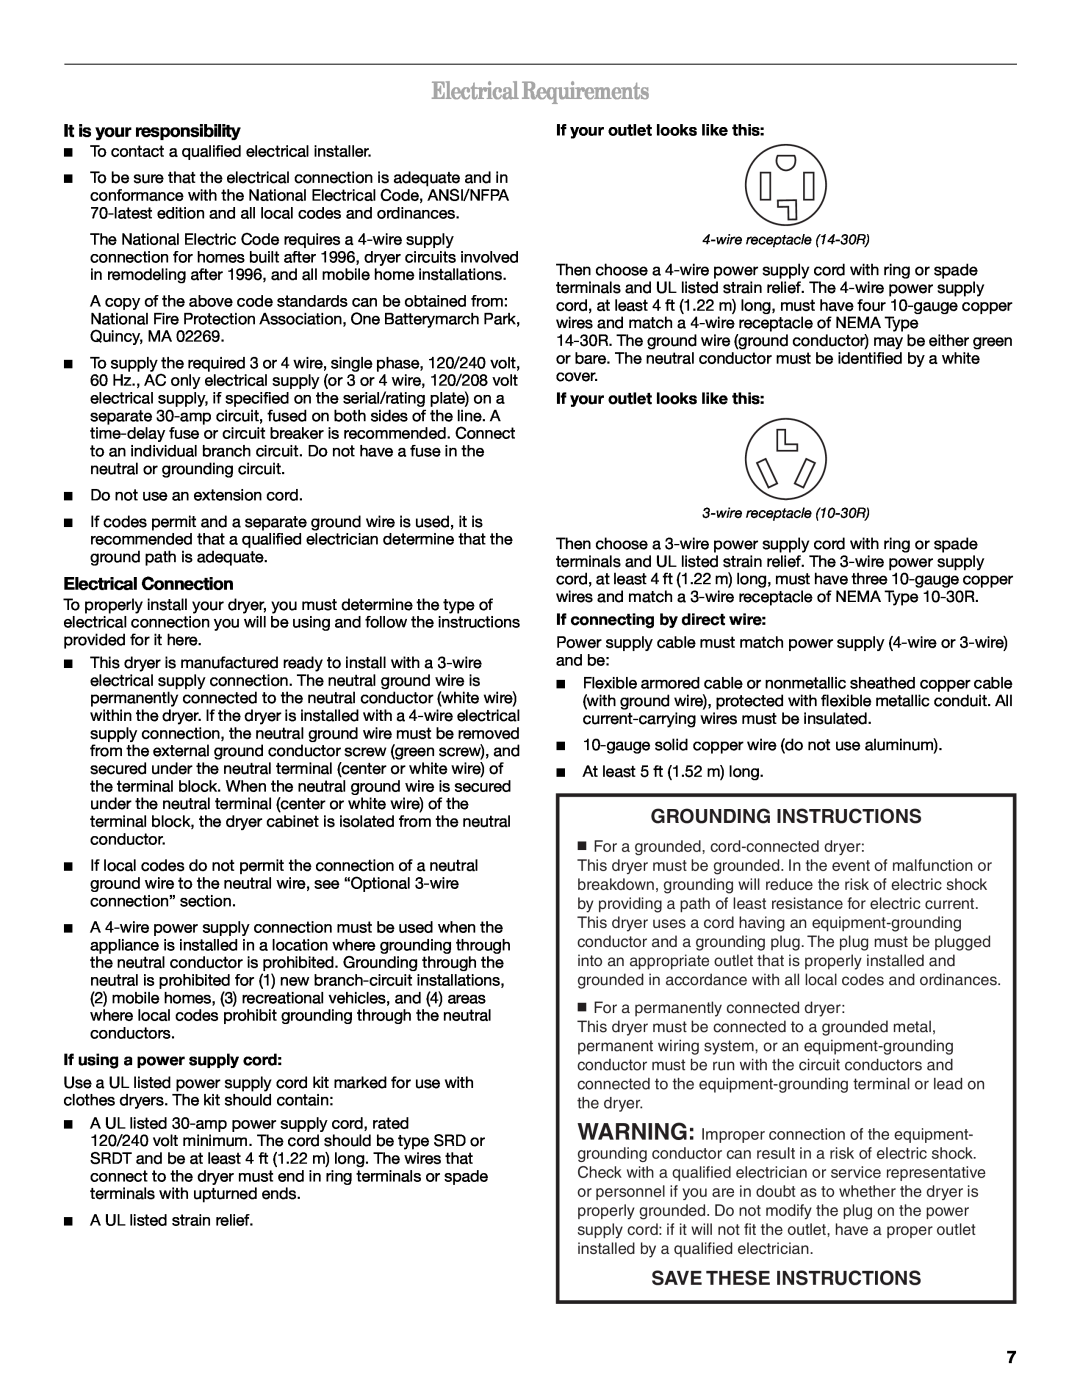 Whirlpool GEW9260PL1 Electrical Requirements, It is your responsibility, Electrical Connection, Grounding Instructions 